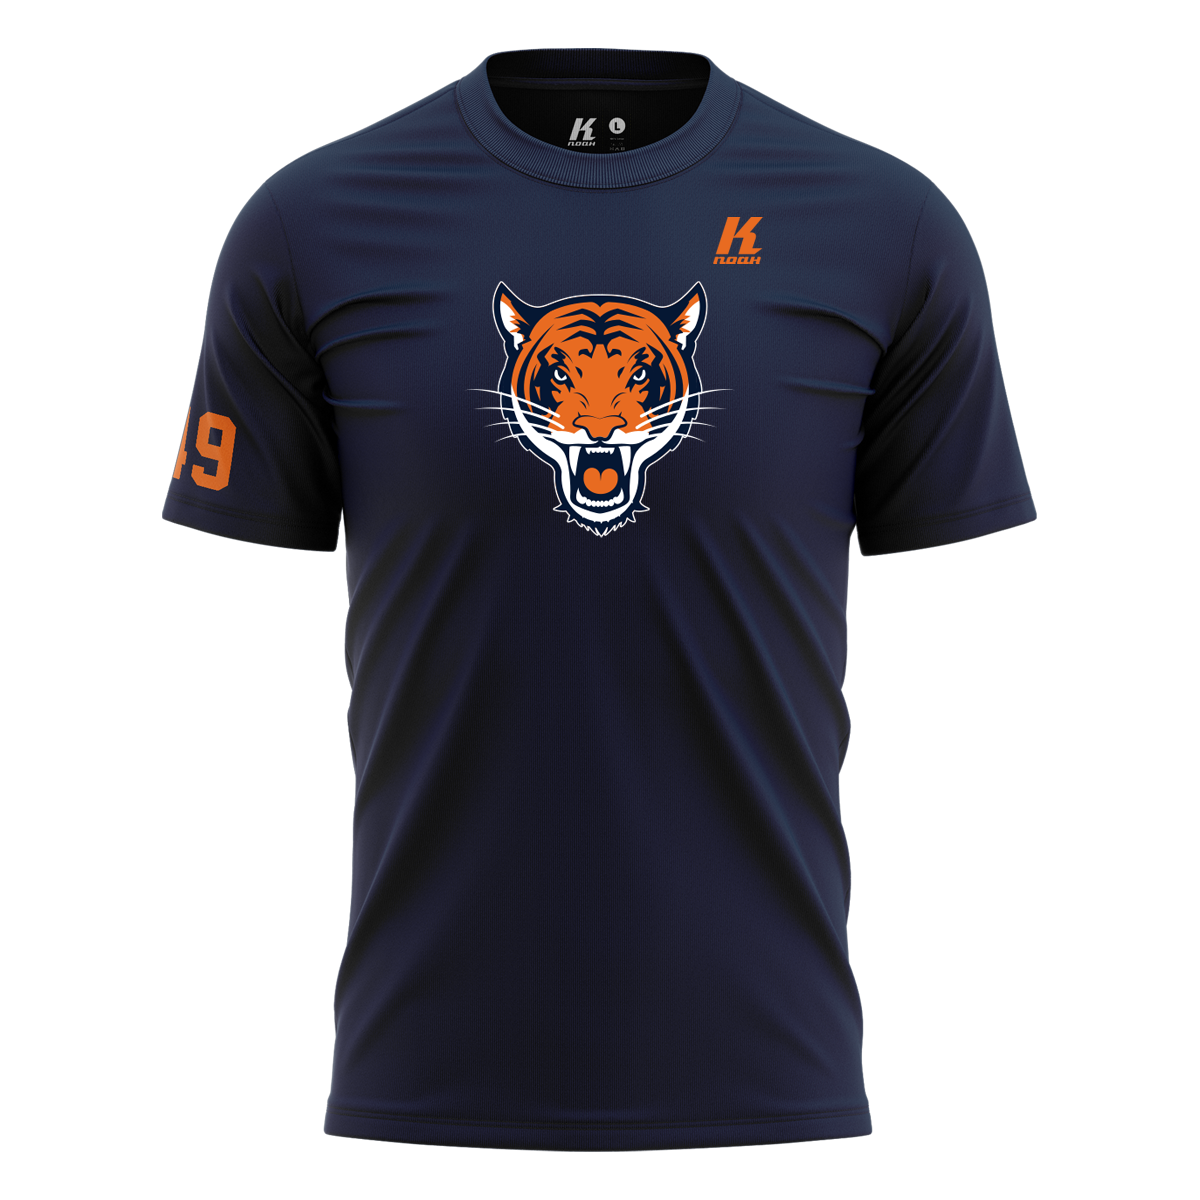 Tigers Basic Tee Essential with Playernumber/Initials